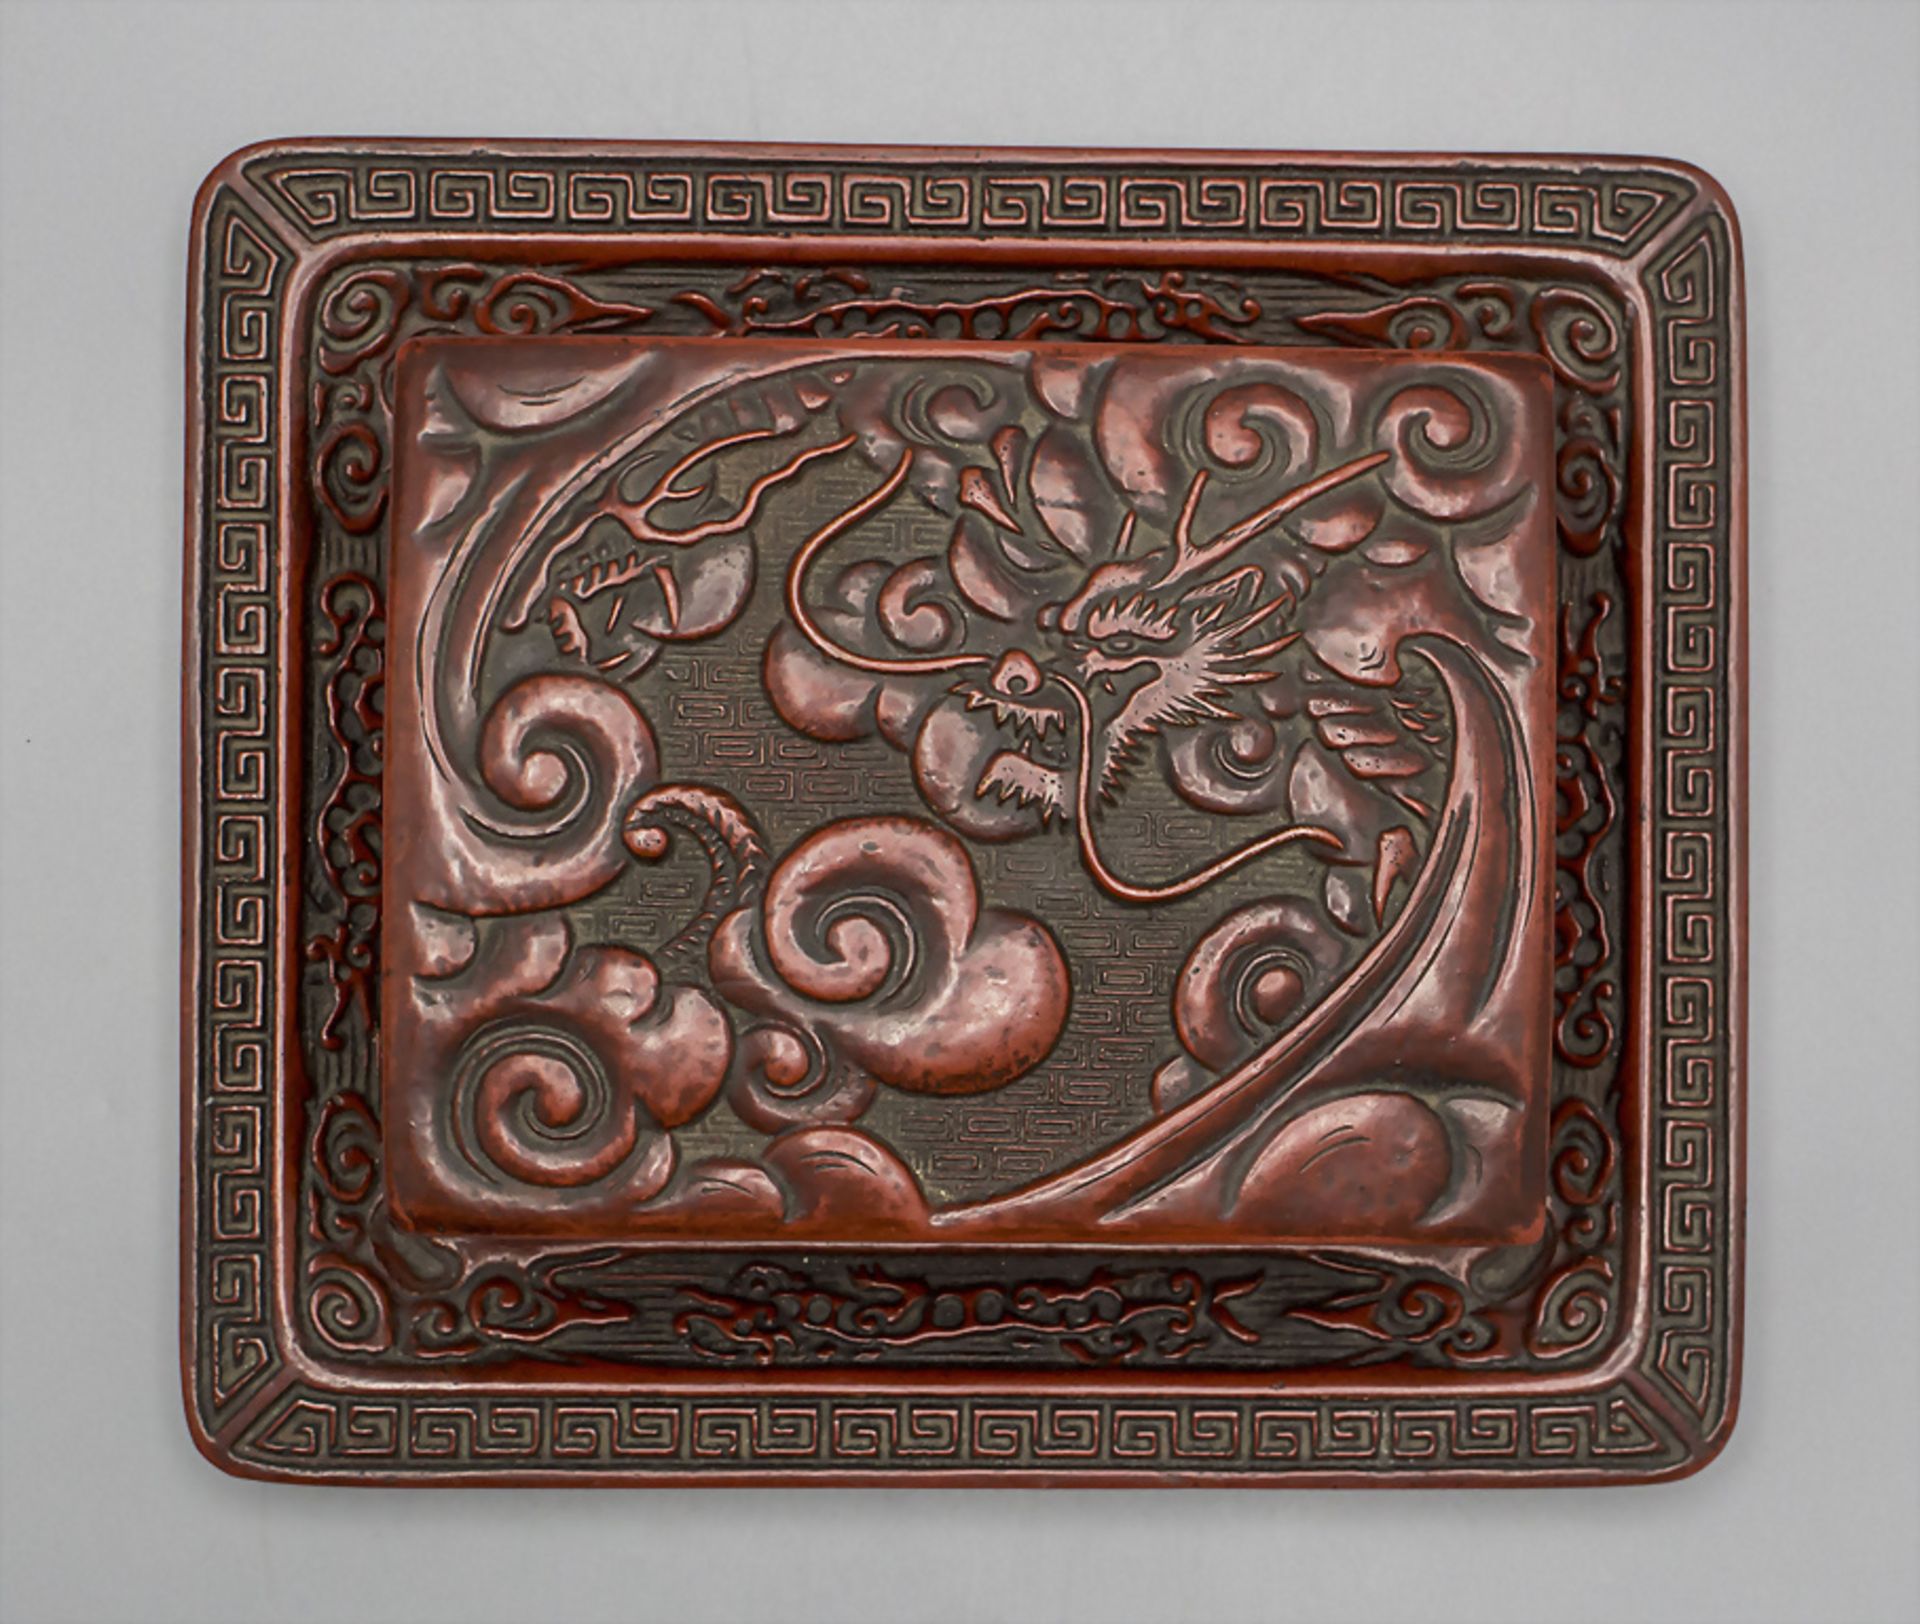 Lackdose mit Tablett / A lacquer box with tray, China, 19. Jh. - Image 2 of 7